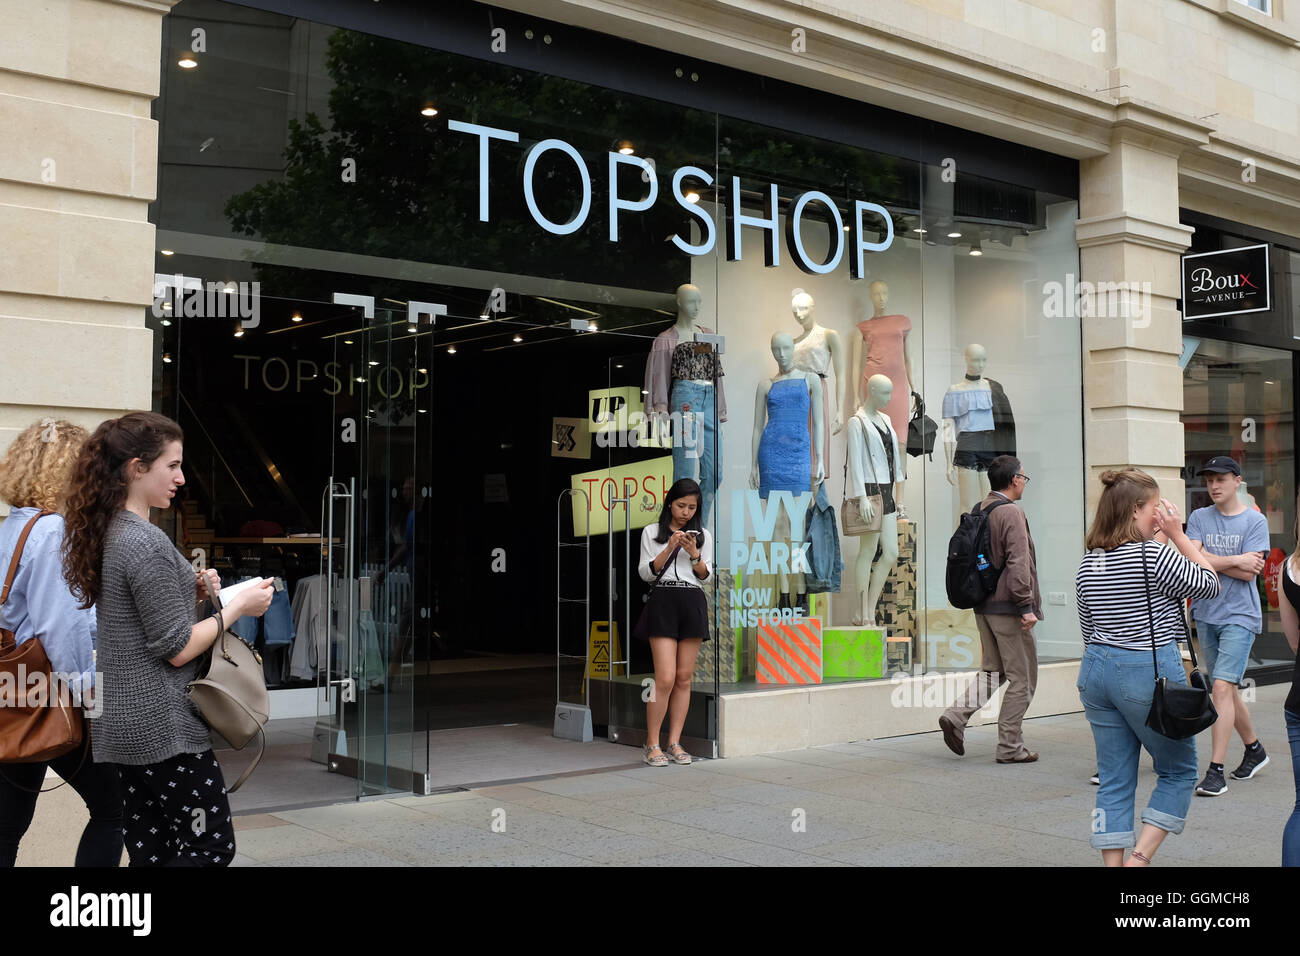 Topshop bath High Resolution Stock Photography and Images - Alamy